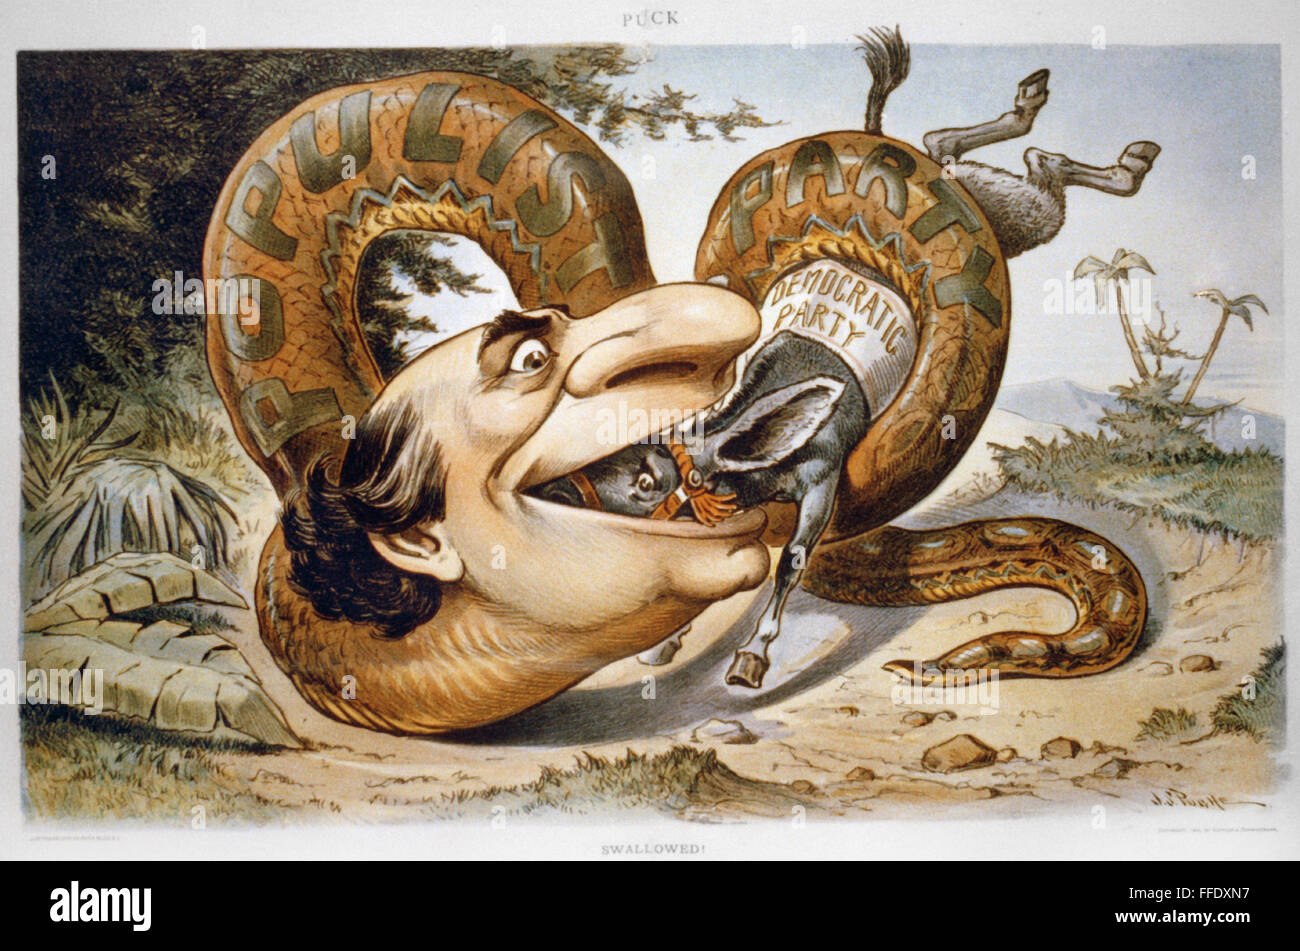 POPULIST PARTY CARTOON. /n'Swallowed!' American political cartoon showing a python snake with the head of William Jennings Bryan, as the Populist Party, swallowing the Democratic Party donkey, 1900. Stock Photo